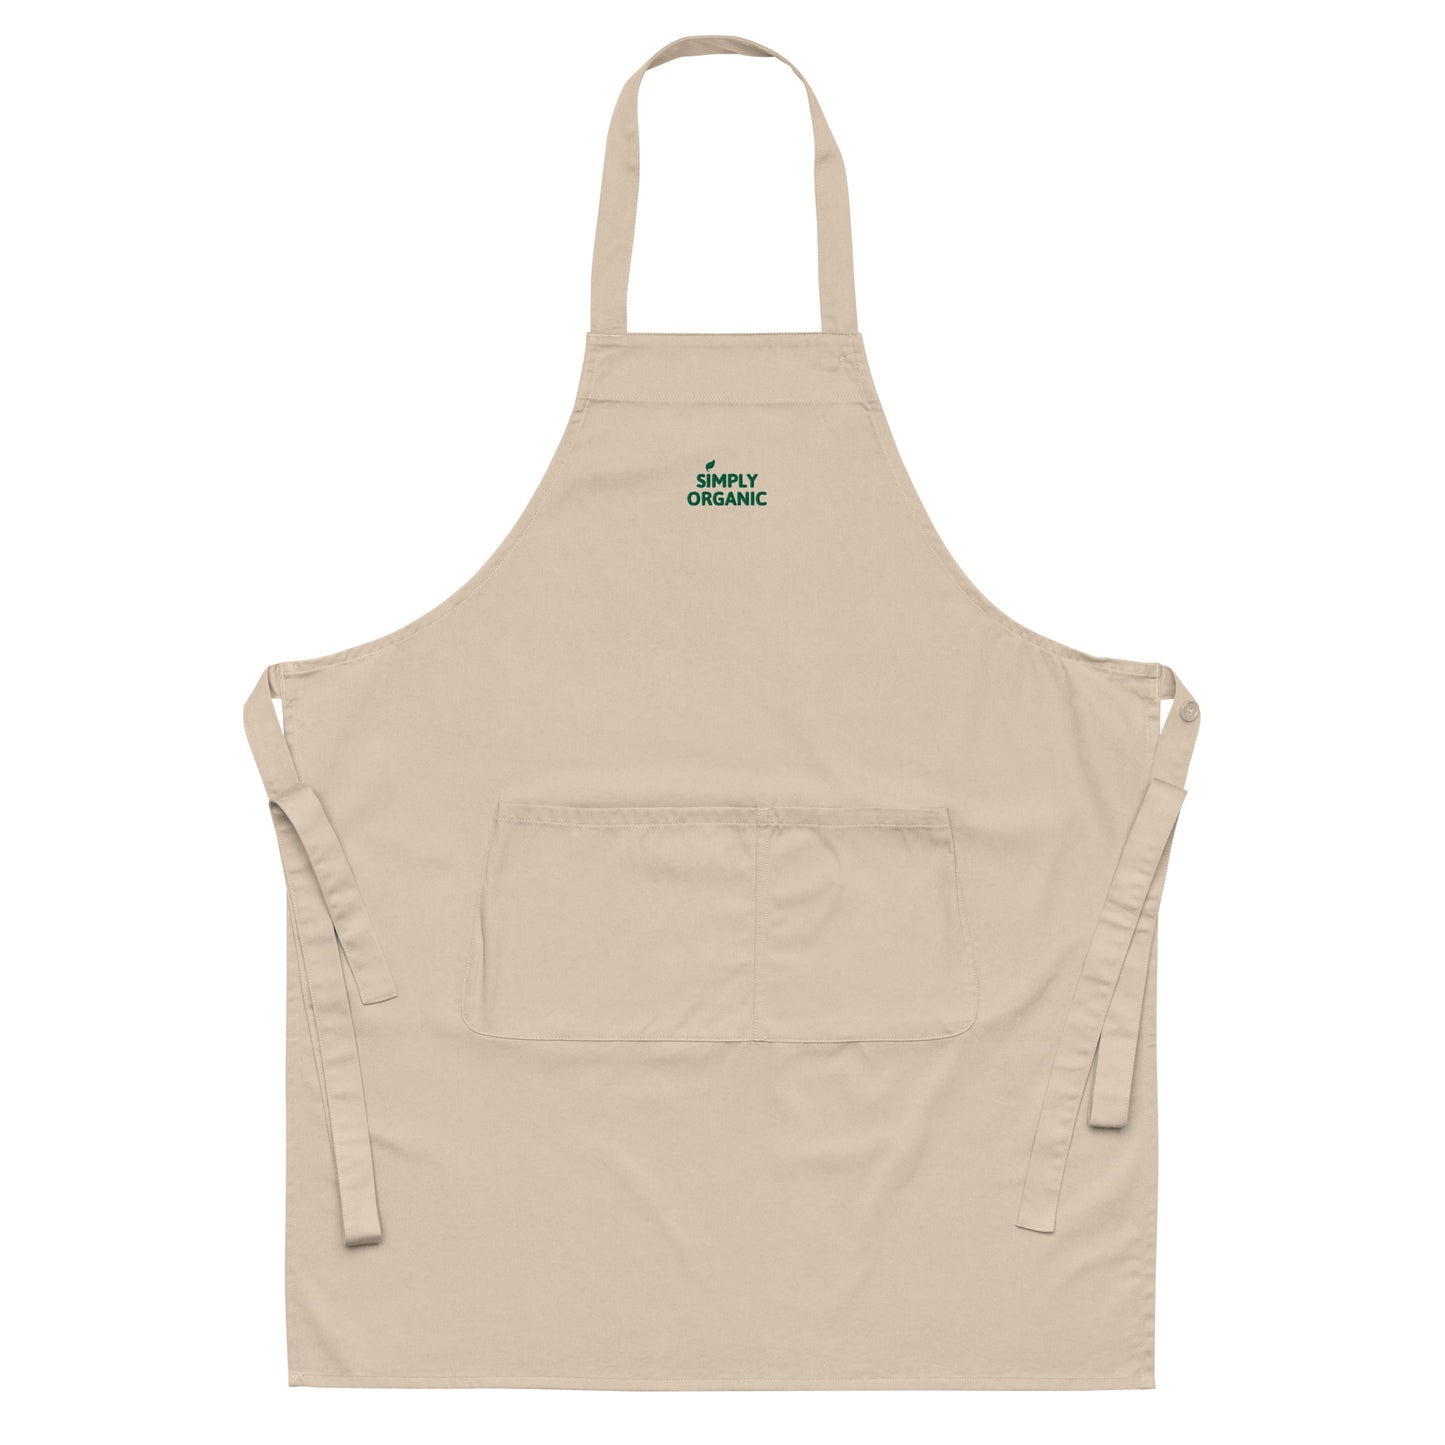 SimplyOrganic Embroidered Organic Cotton Apron product only